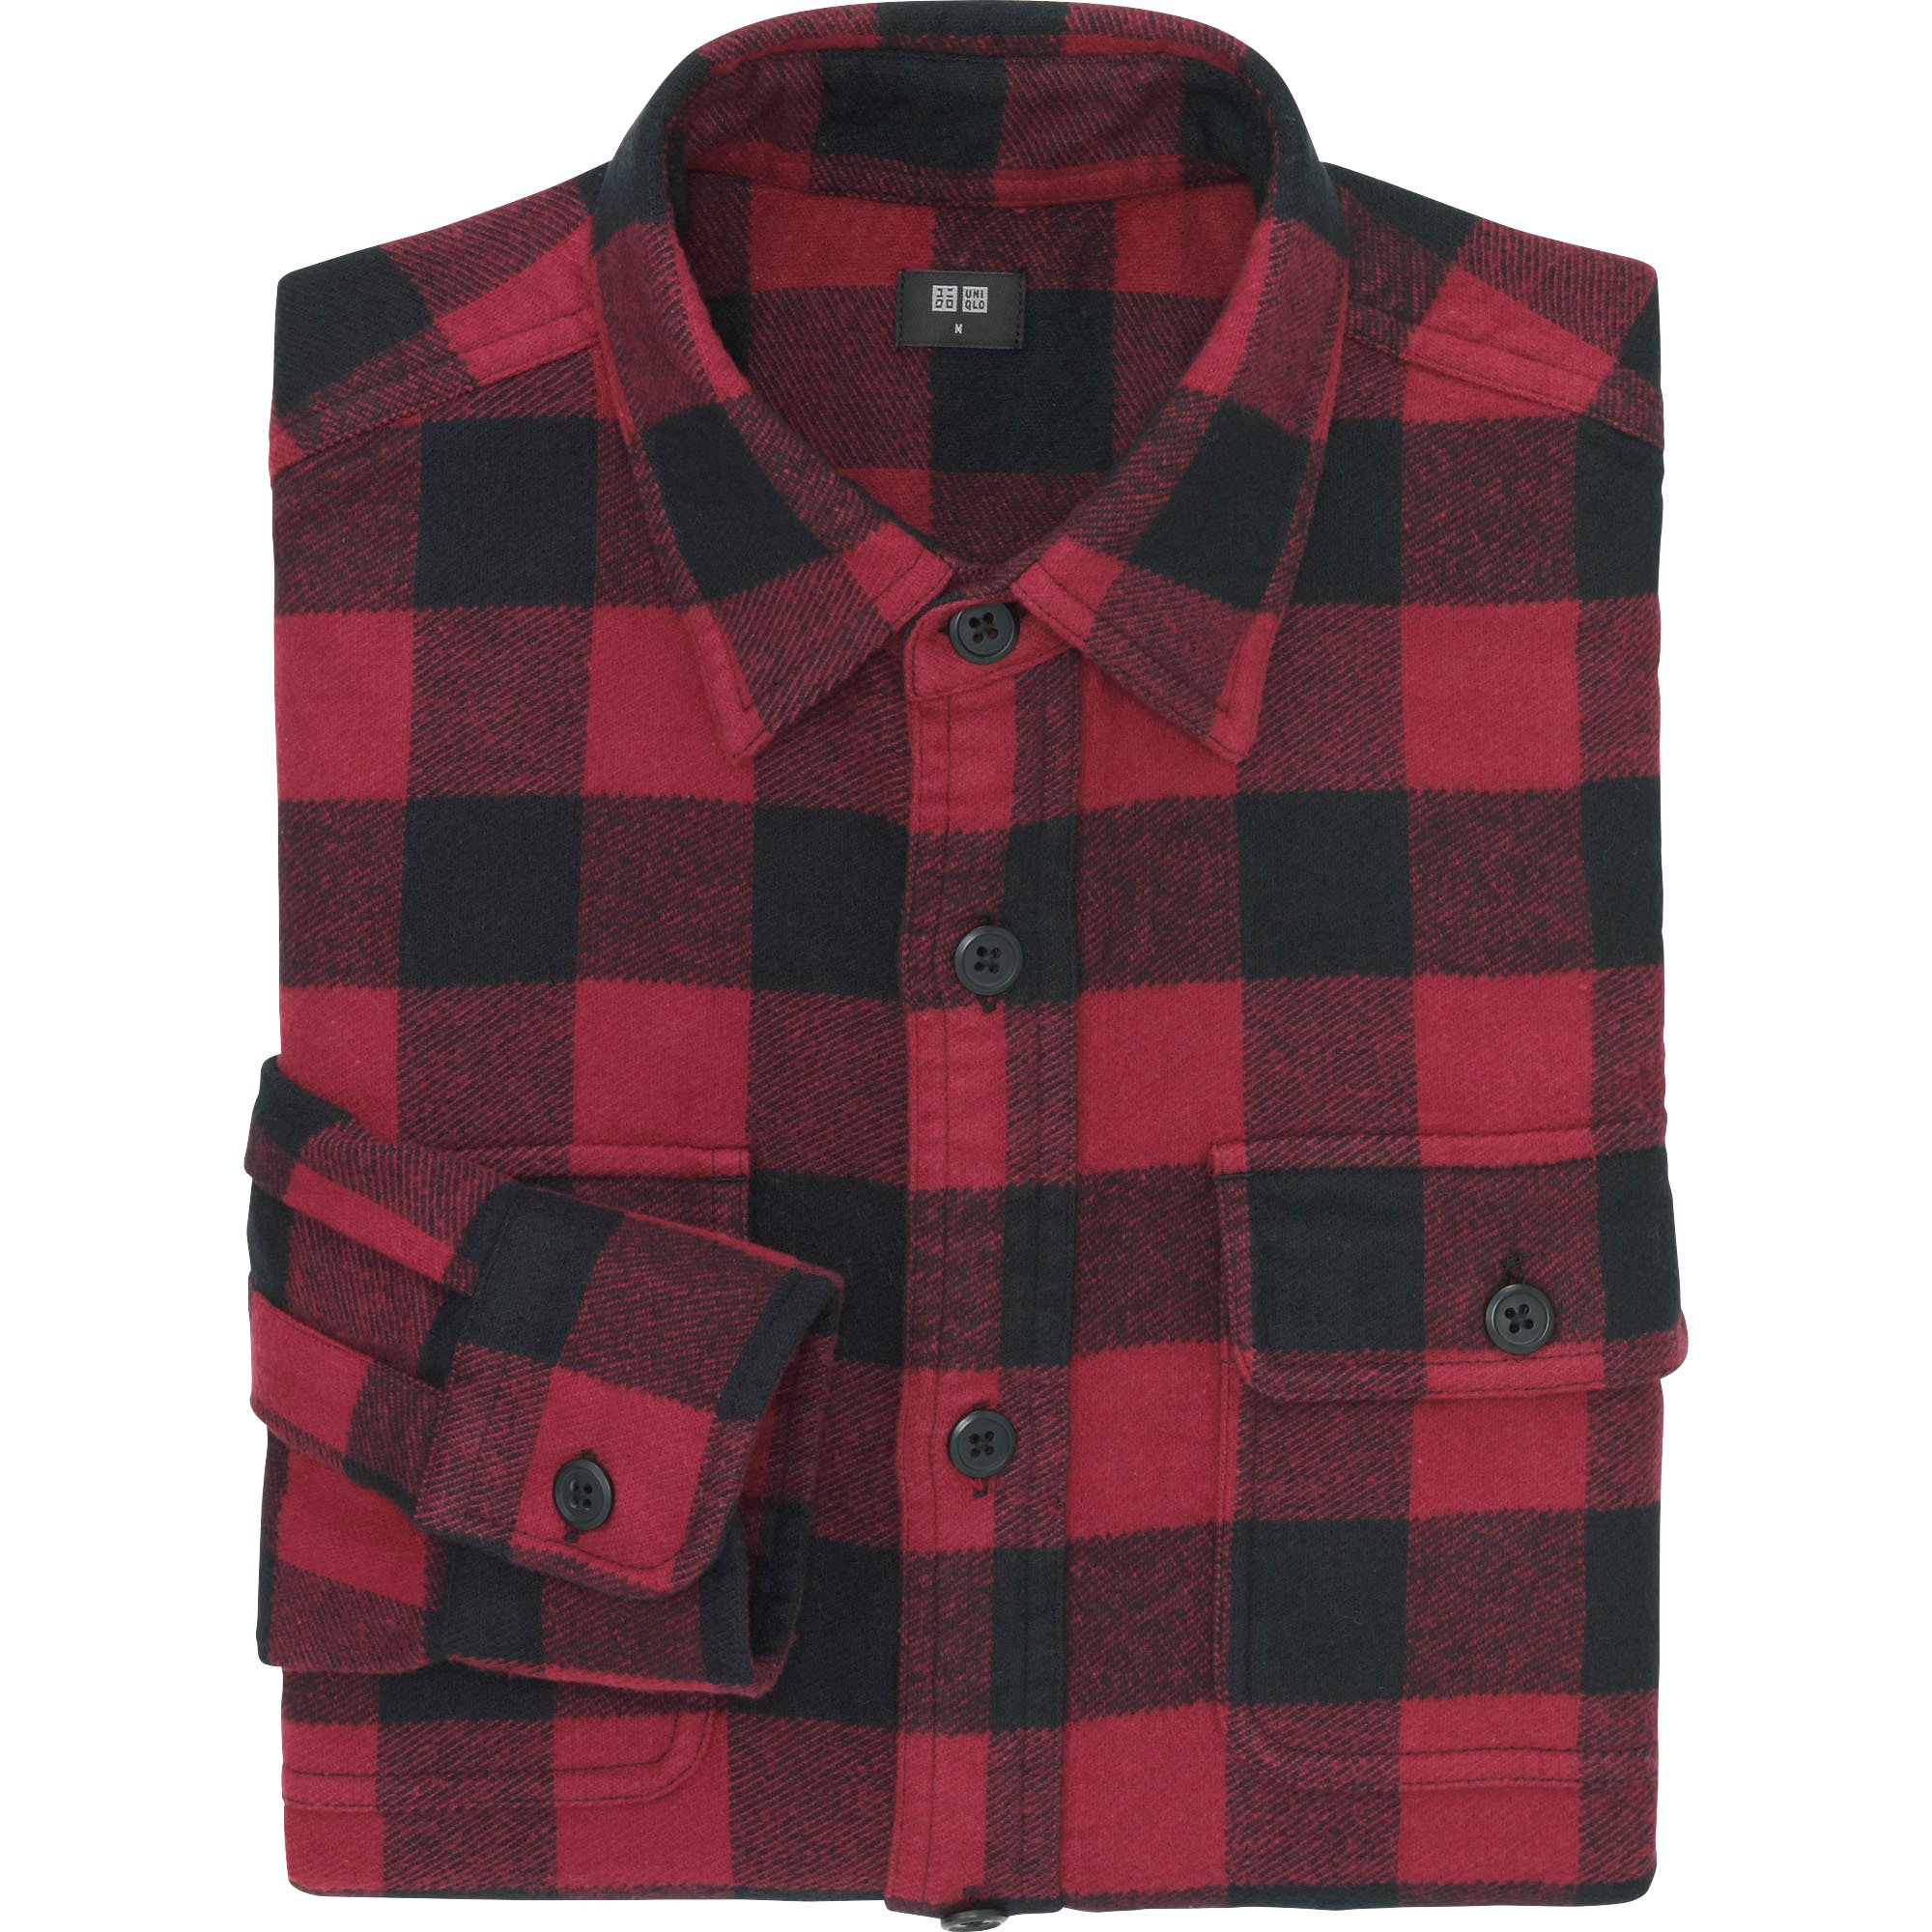 Uniqlo Flannel - Uniqlo Flannel Shirts $19.90 Limited Offer this Week ...